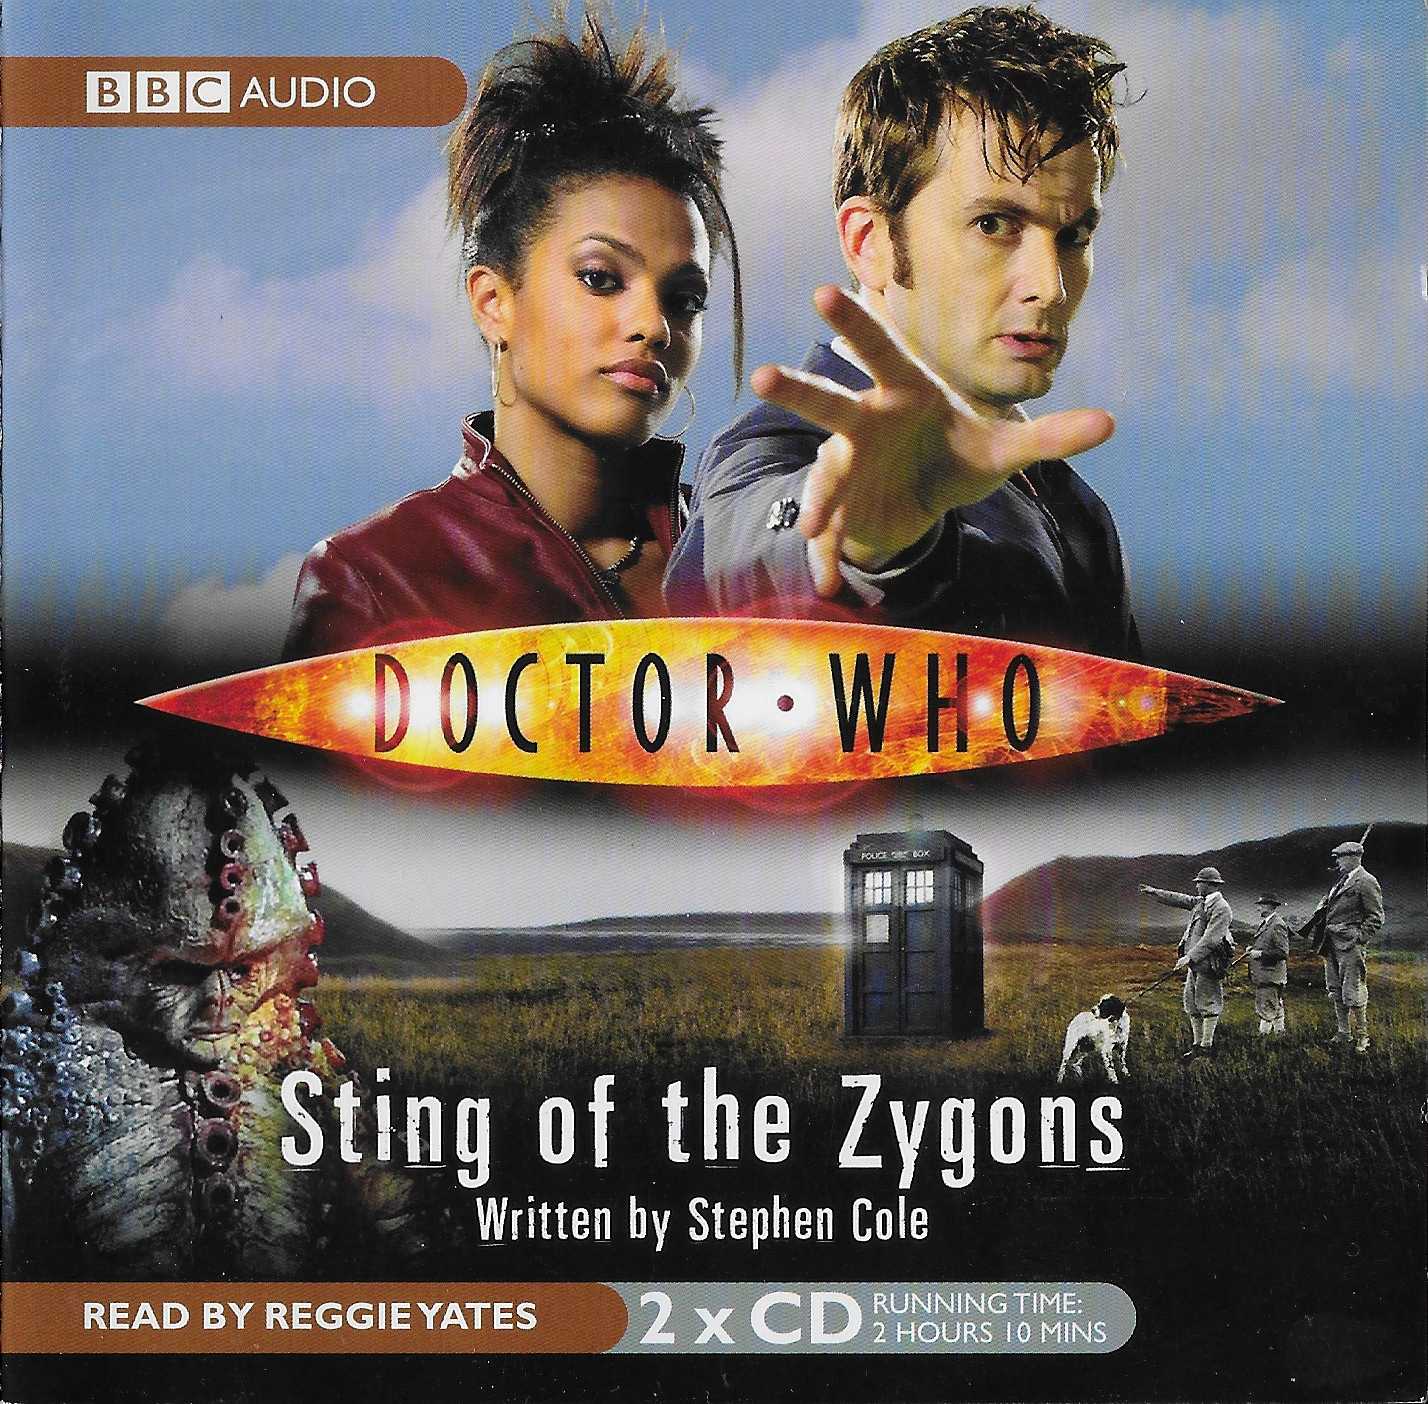 Picture of ISBN 978-1-405-67774-5 Doctor Who - Sting of the Zygons by artist Stephen Cole from the BBC cds - Records and Tapes library